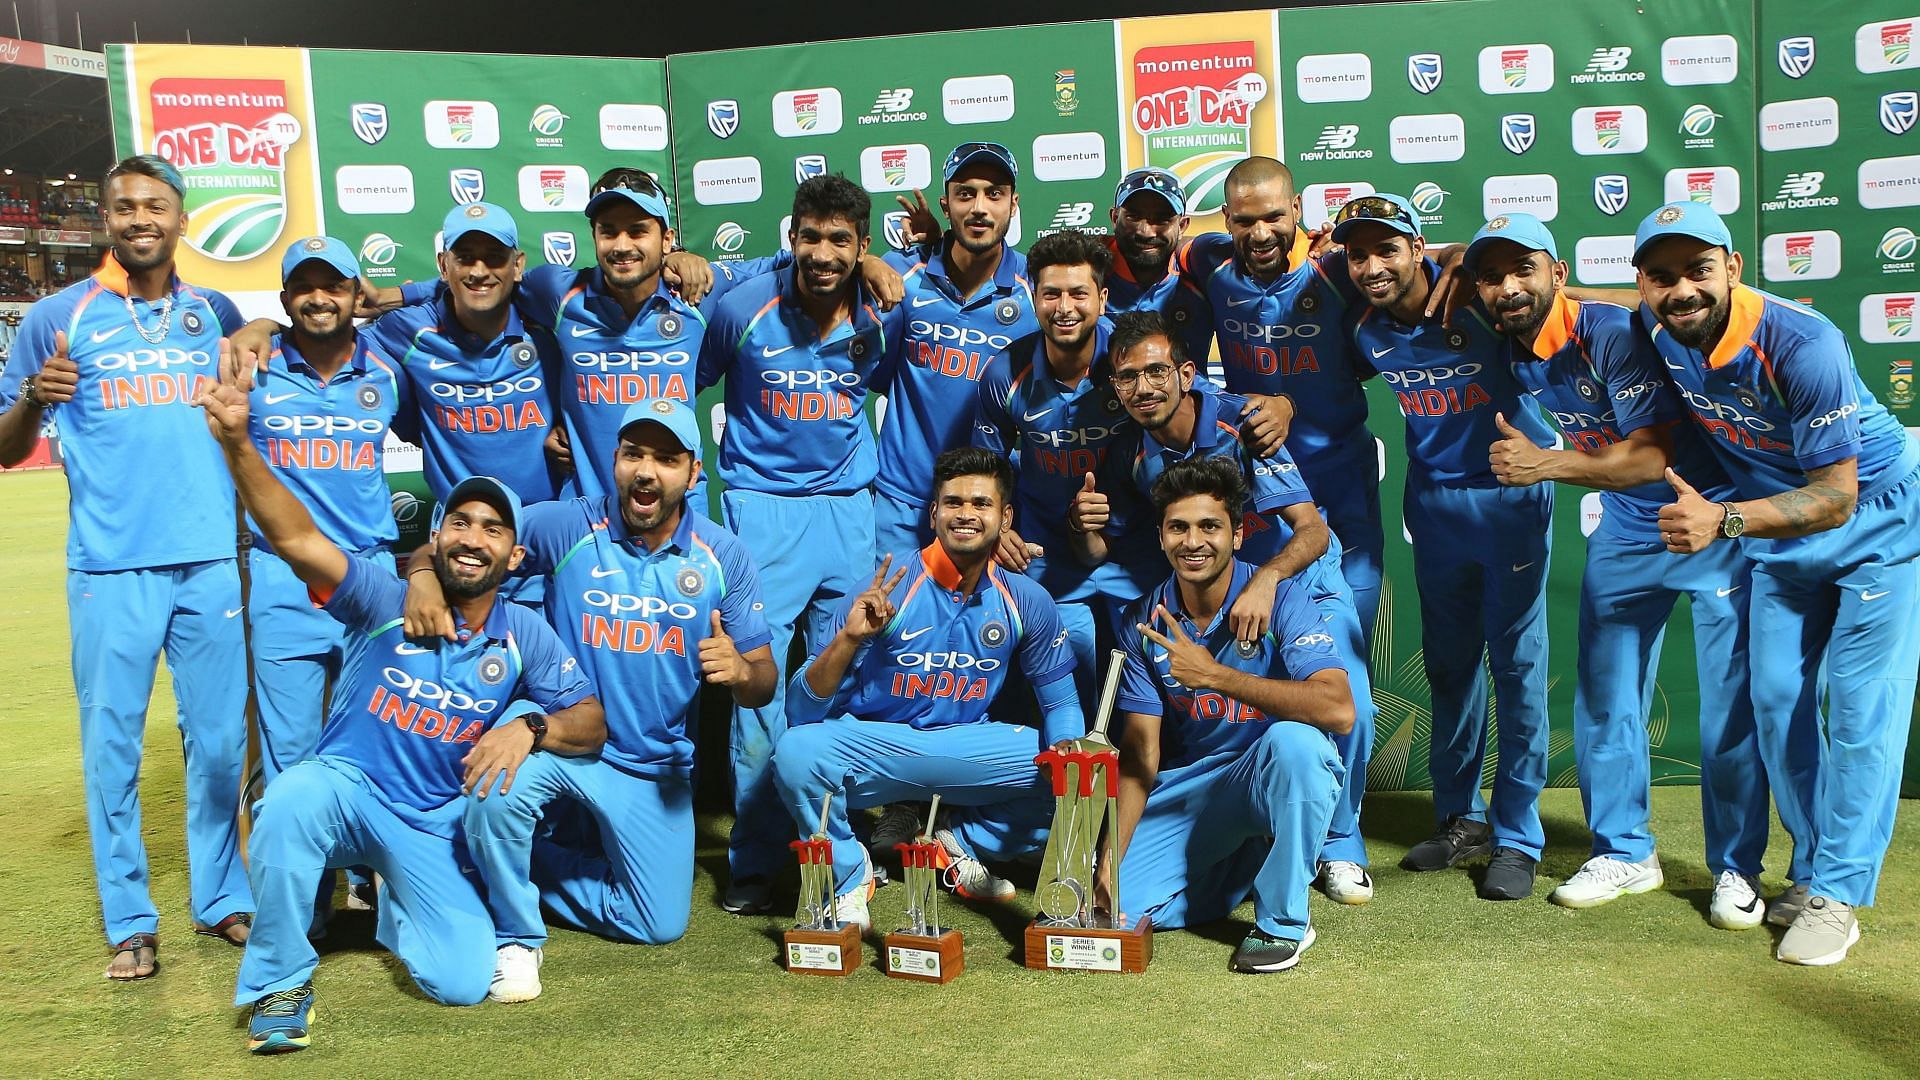 India won ODI series in every country except England under Kohli [Image- BCCI]